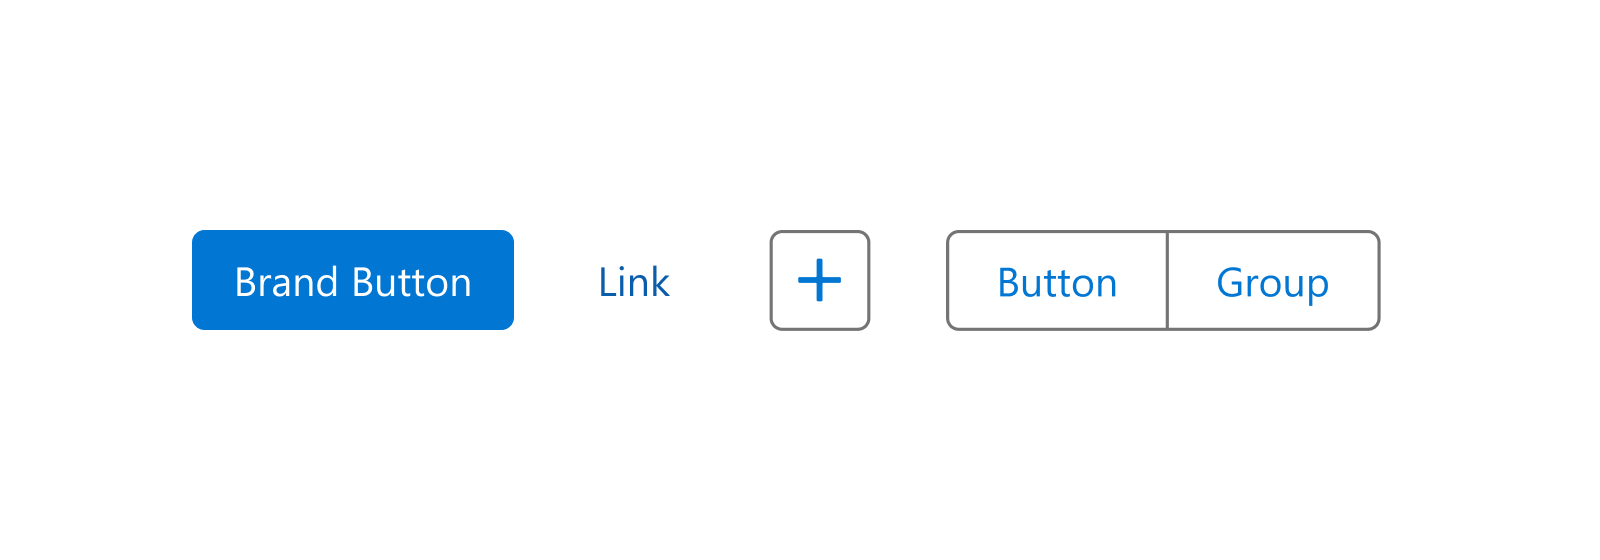 A graphic showing various buttons and links, illustrating how Salesforce blue is intentionally used in our UI.